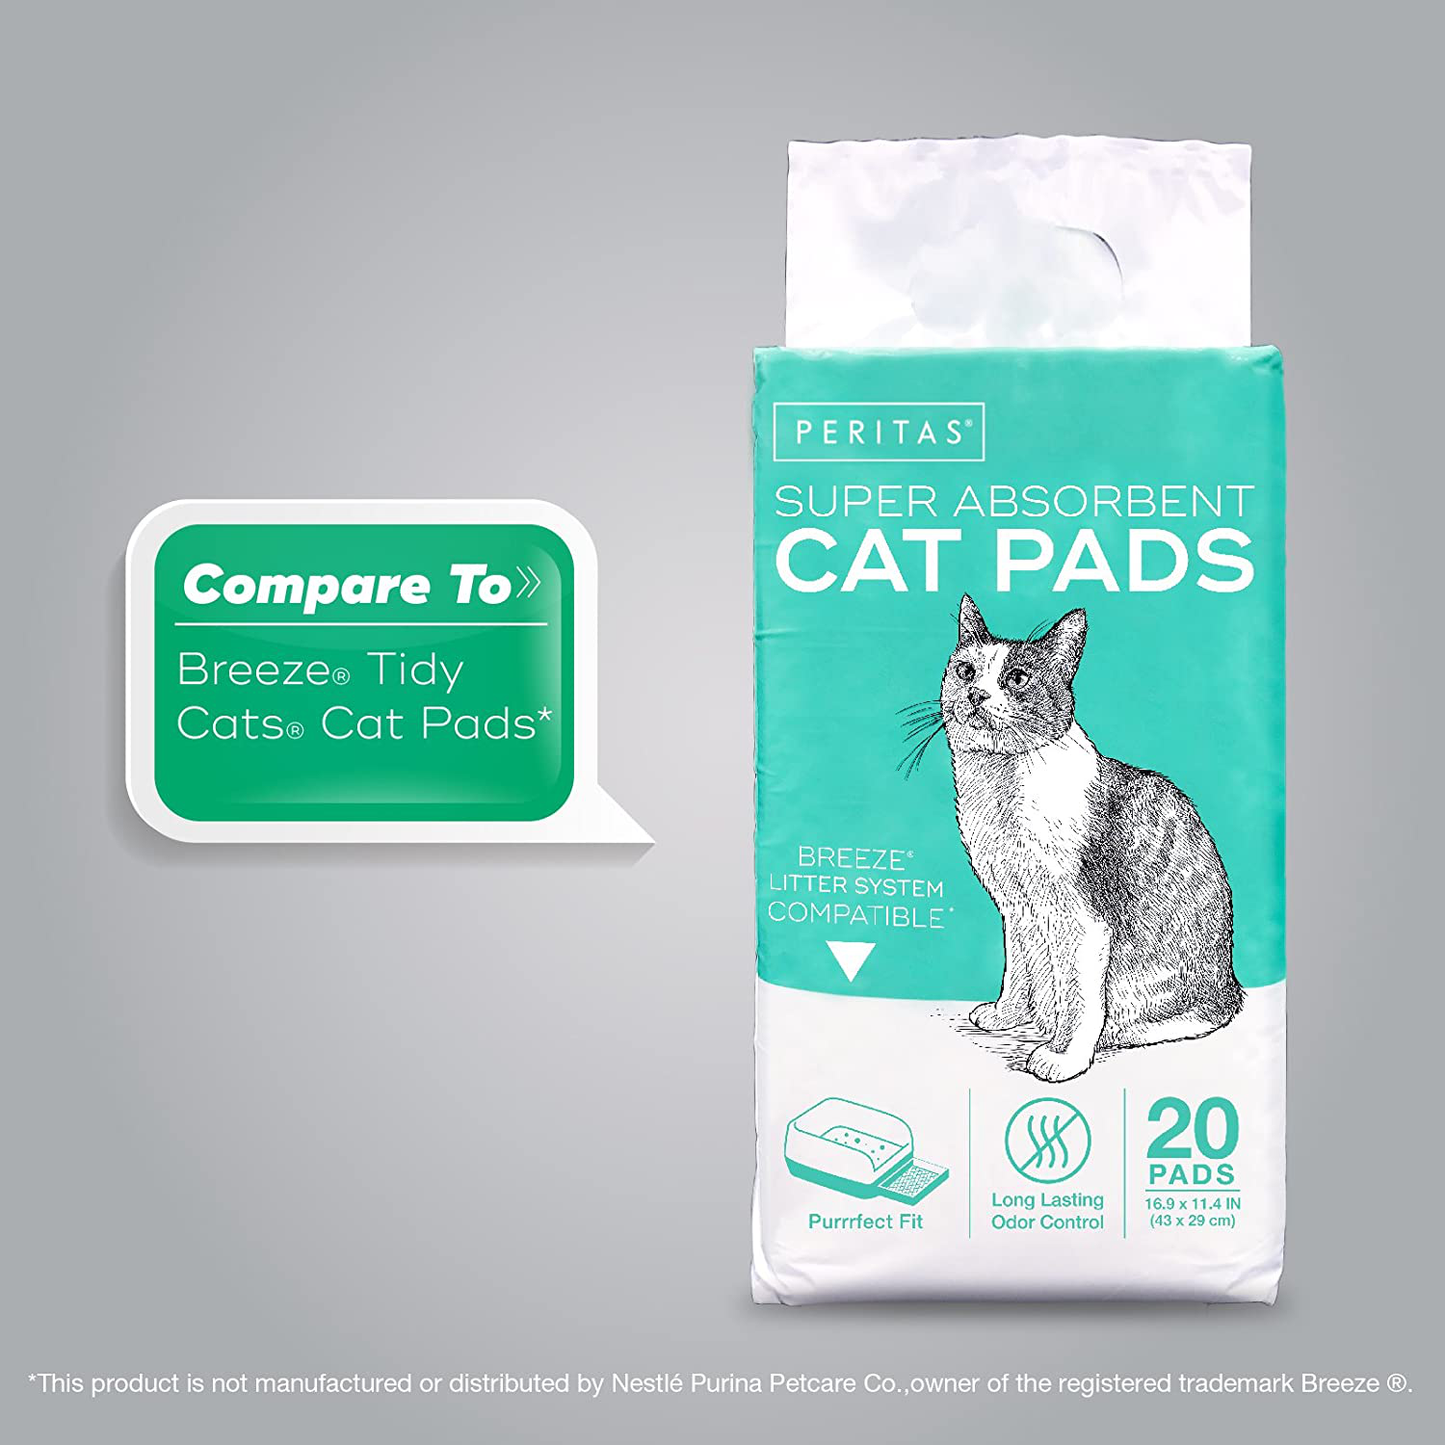 Peritas Cat Pads | Generic Refill for Breeze Tidy Cat Litter System | Cat Liner Pads for Litter Box | Quick-Dry, Super Absorbent, Leak Proof | 16.9"X11.4" (80 Count)